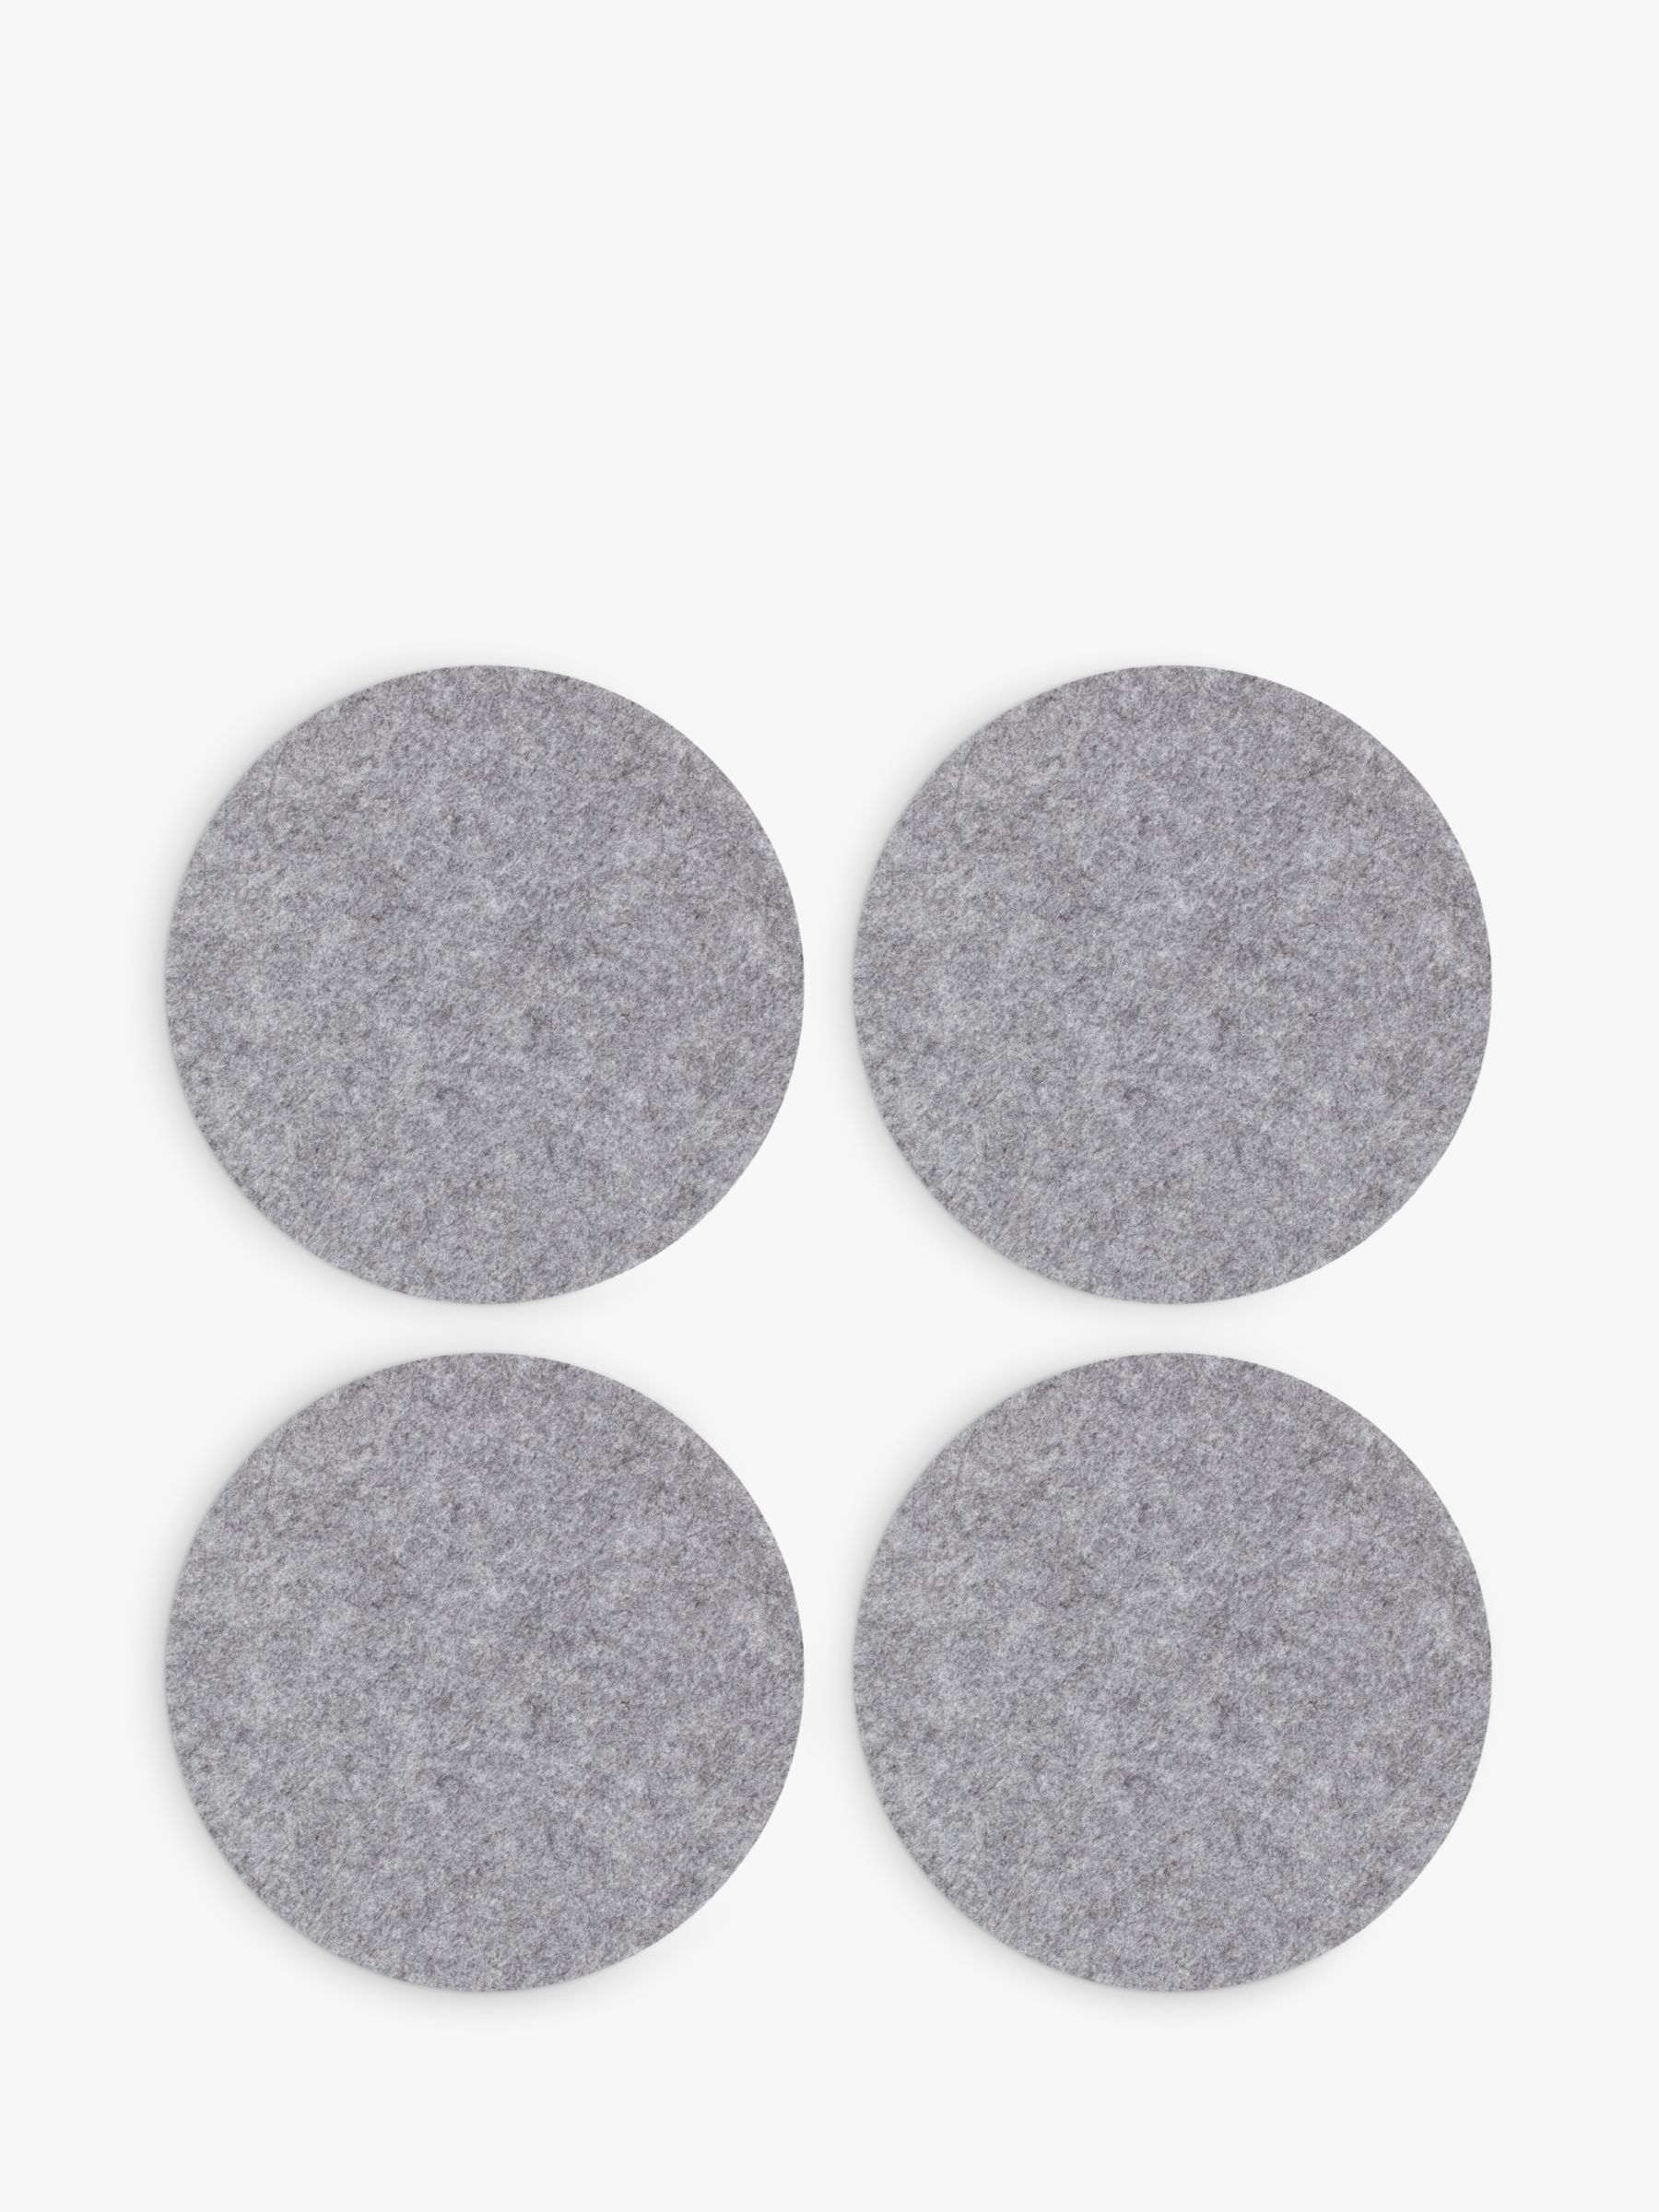 House by John Lewis Round Felt Placemats